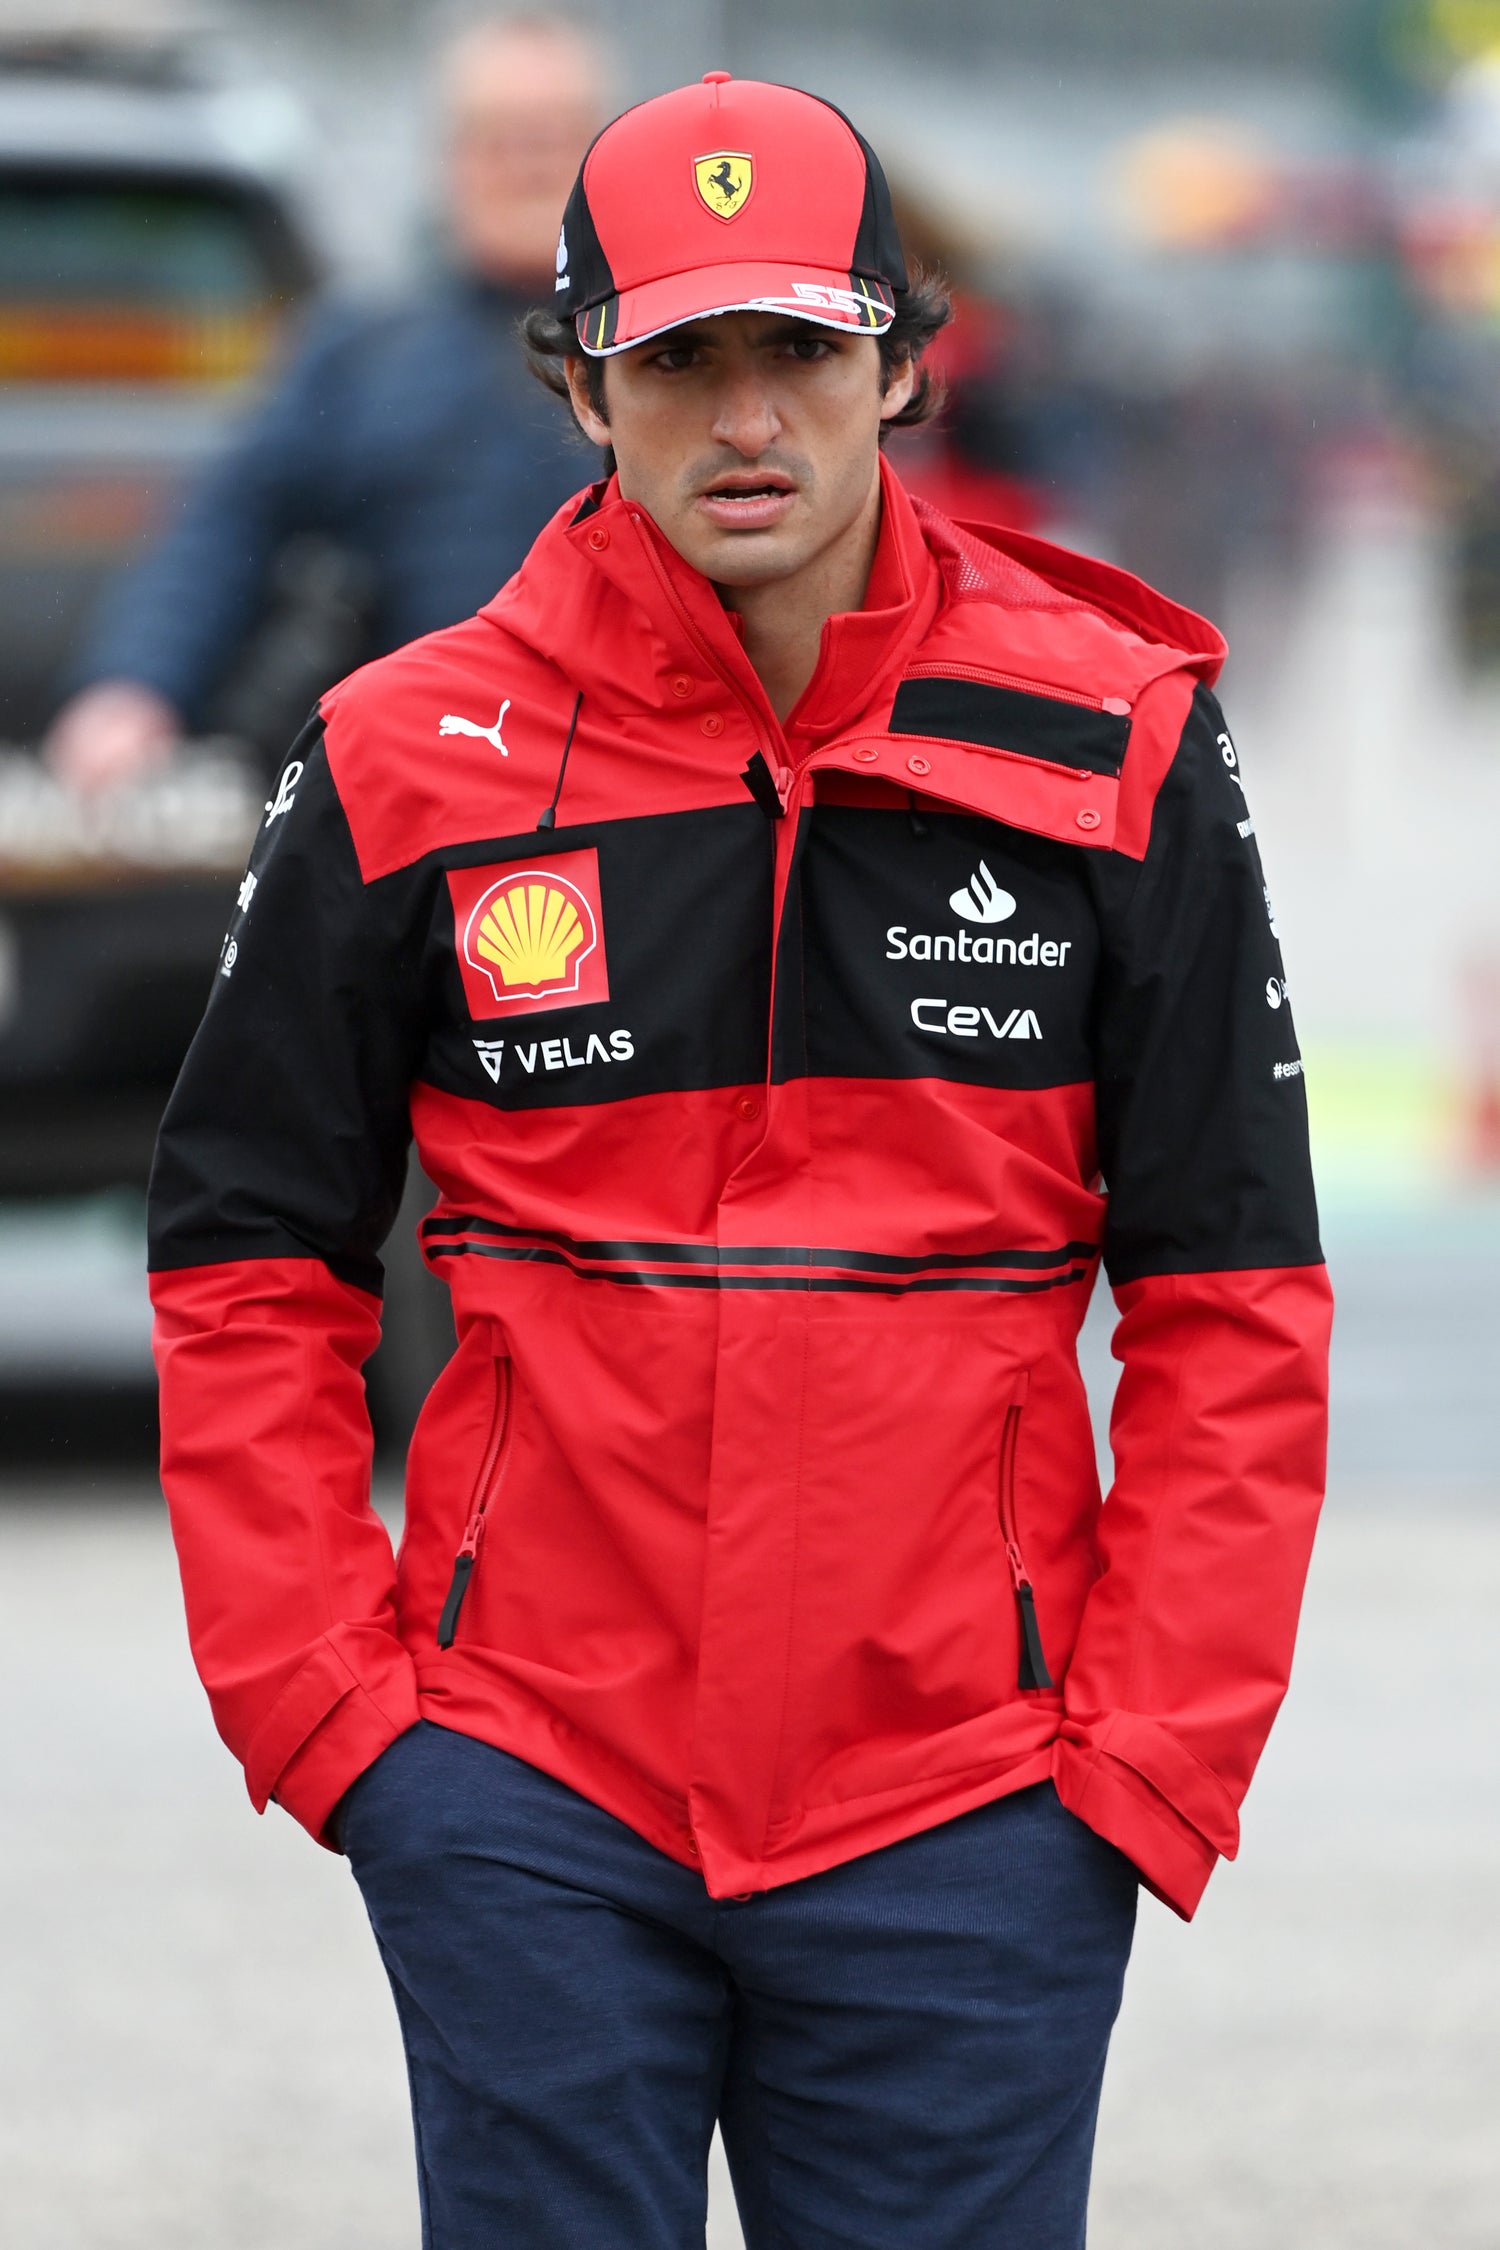 man wearing red F1 team jacket and hat